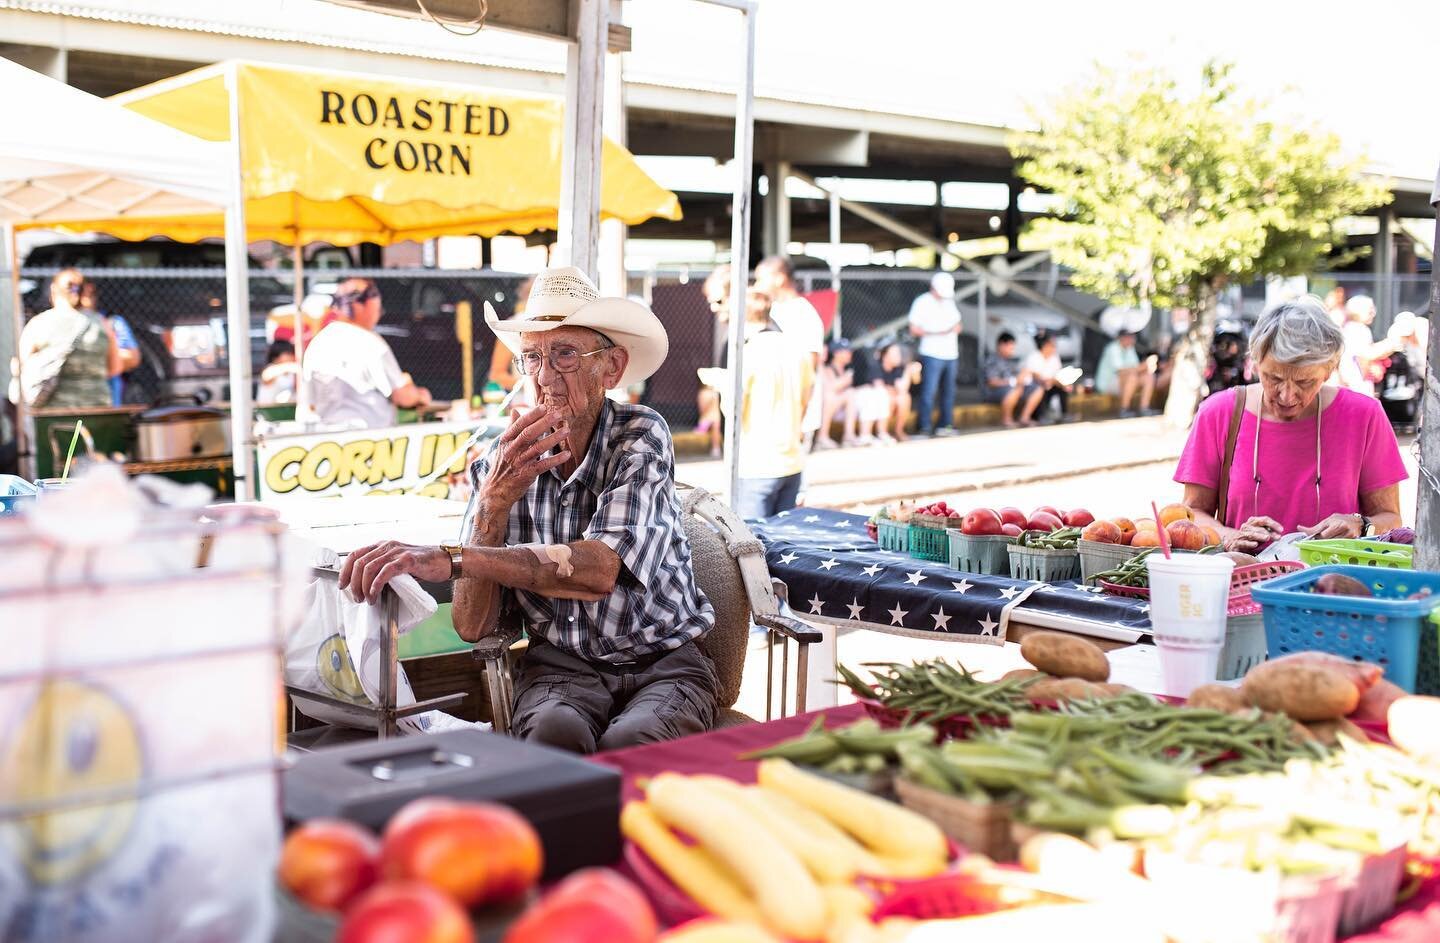 In case you missed it last week, check out the photo story on the Farmer's Market to inspire you on your Saturday morning trip Downtown! Go support our local farmers and vendors this weekend!